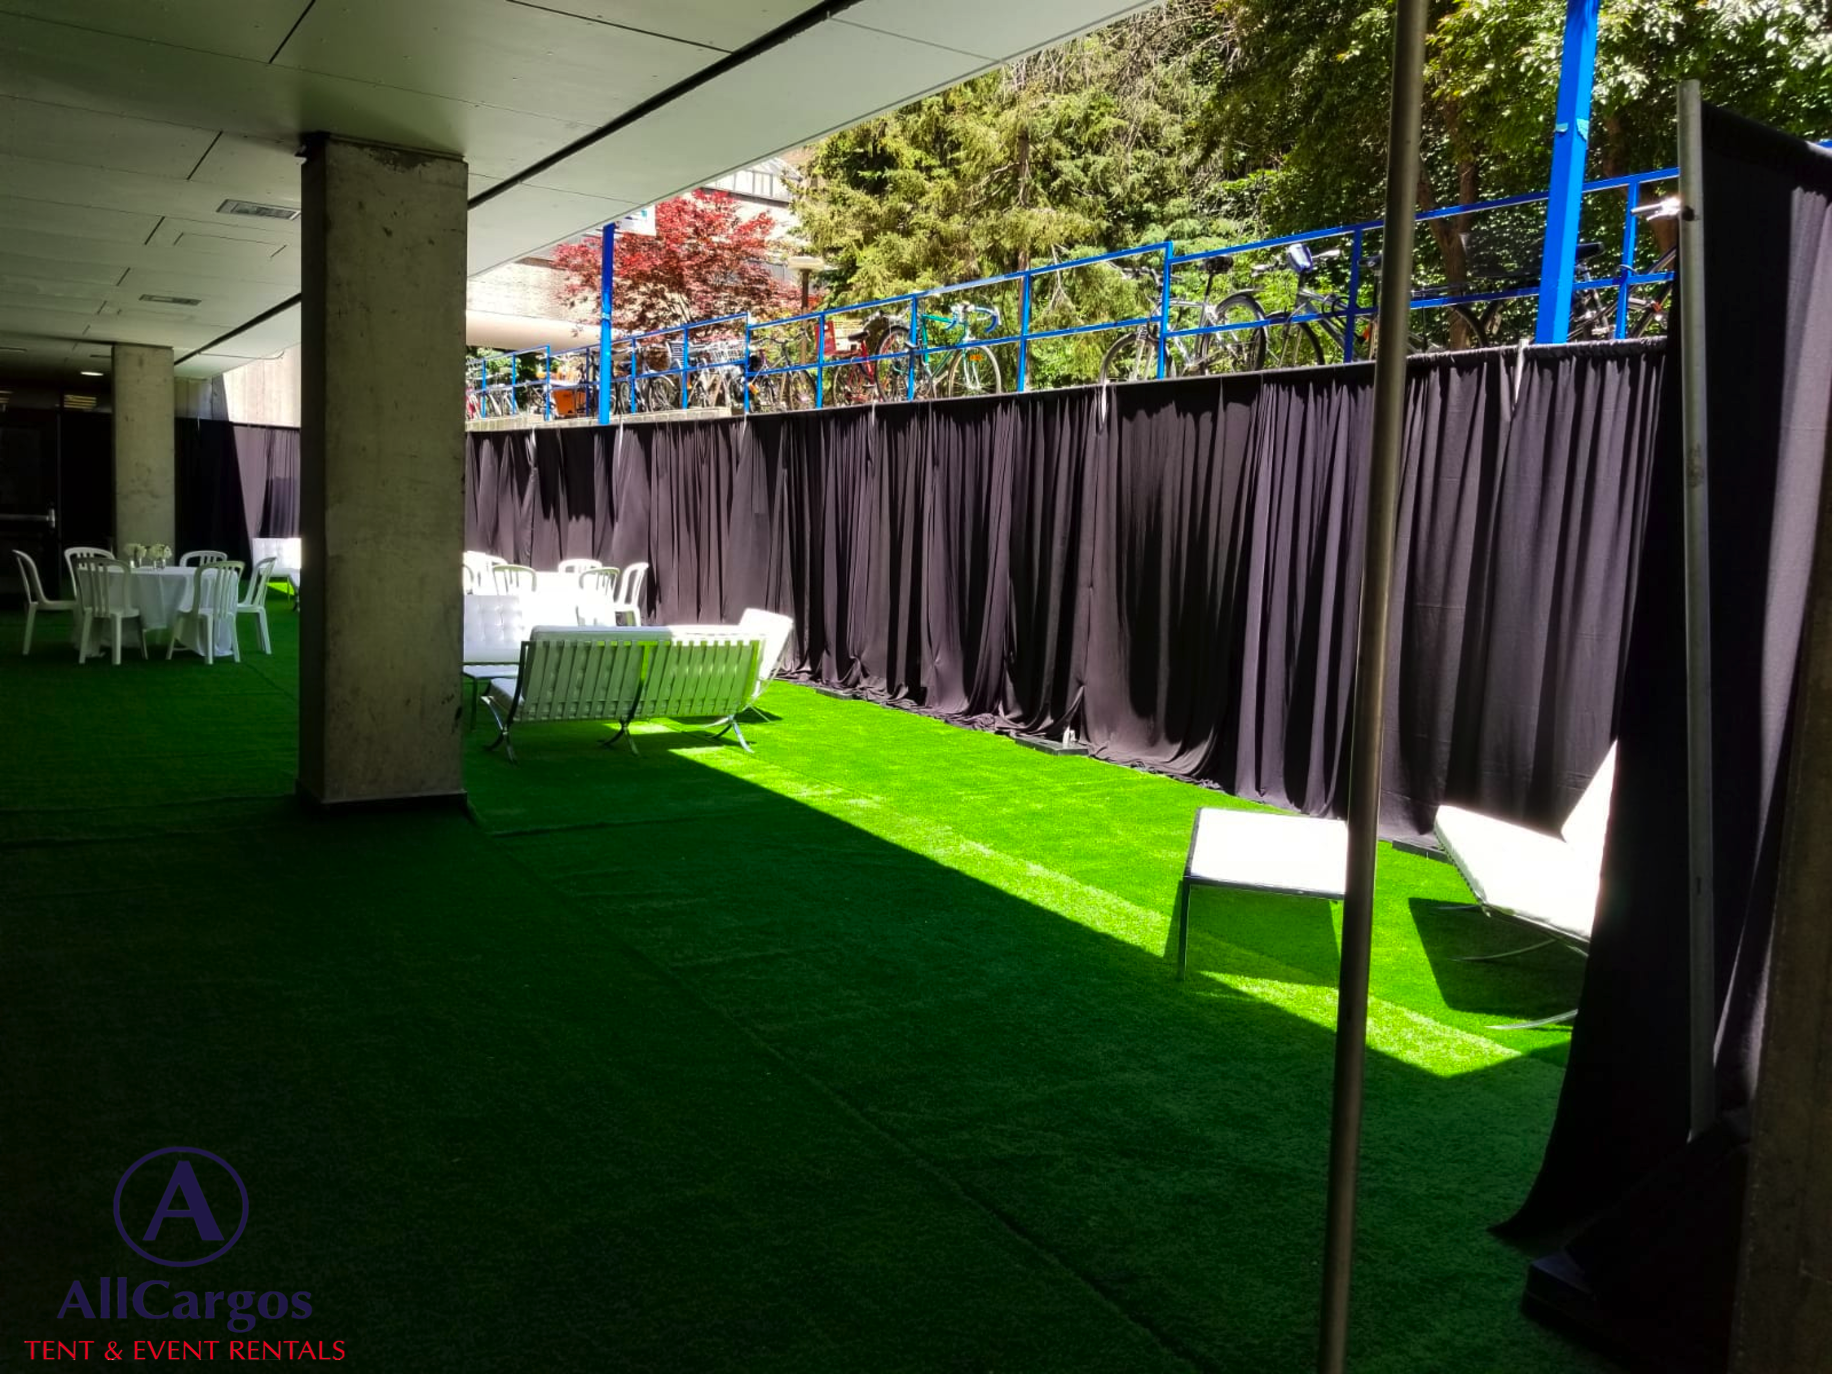 Ryerson University Astroturf, Draping and Lounge Furniture Rental Installation